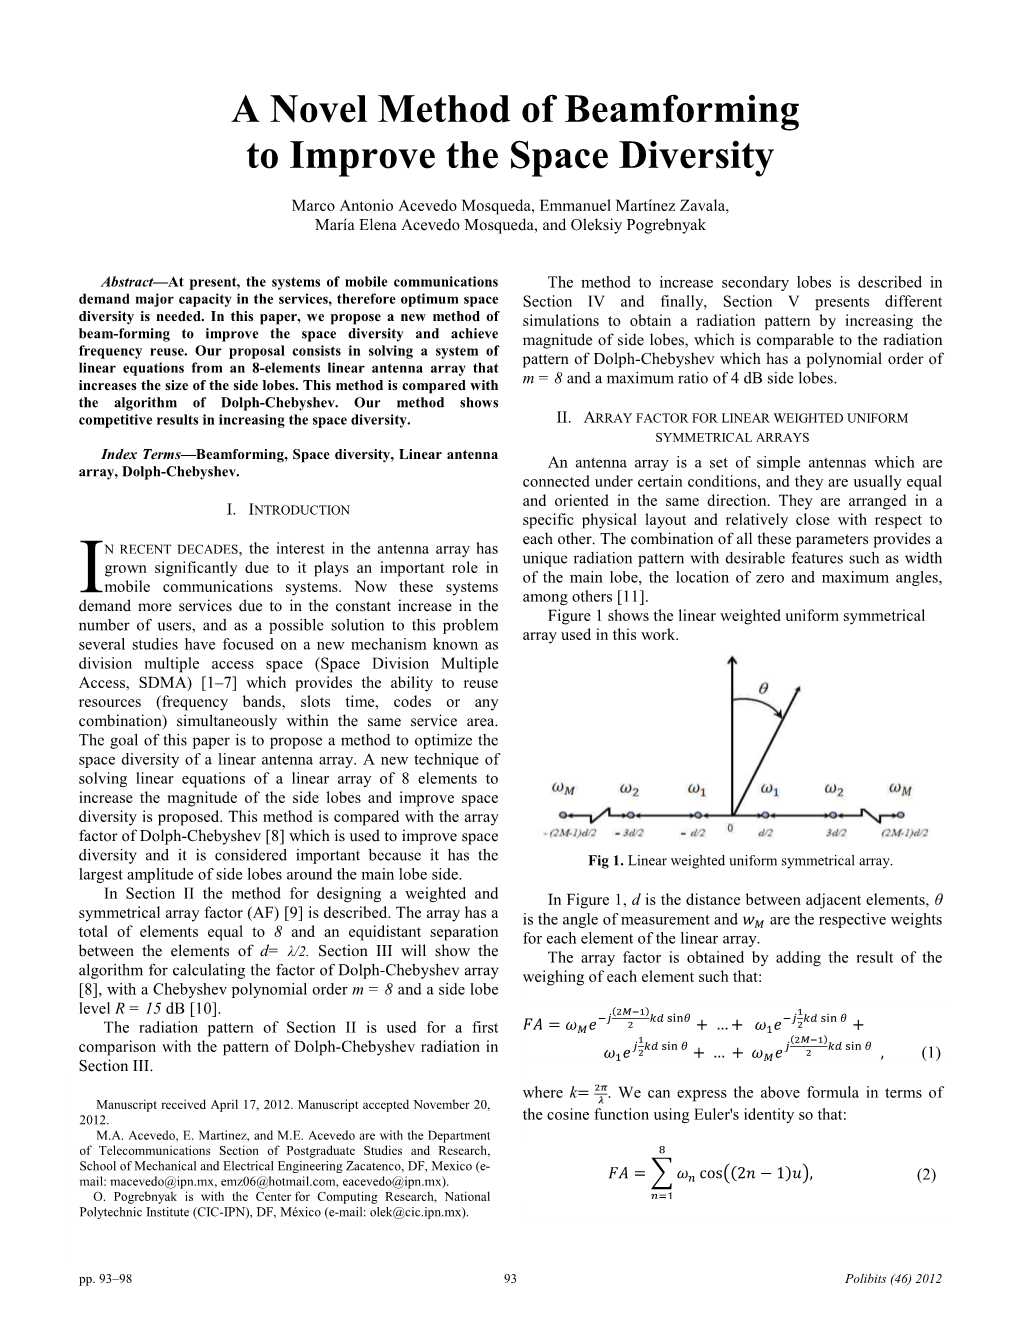 A Novel Method of Beamforming to Improve the Space Diversity